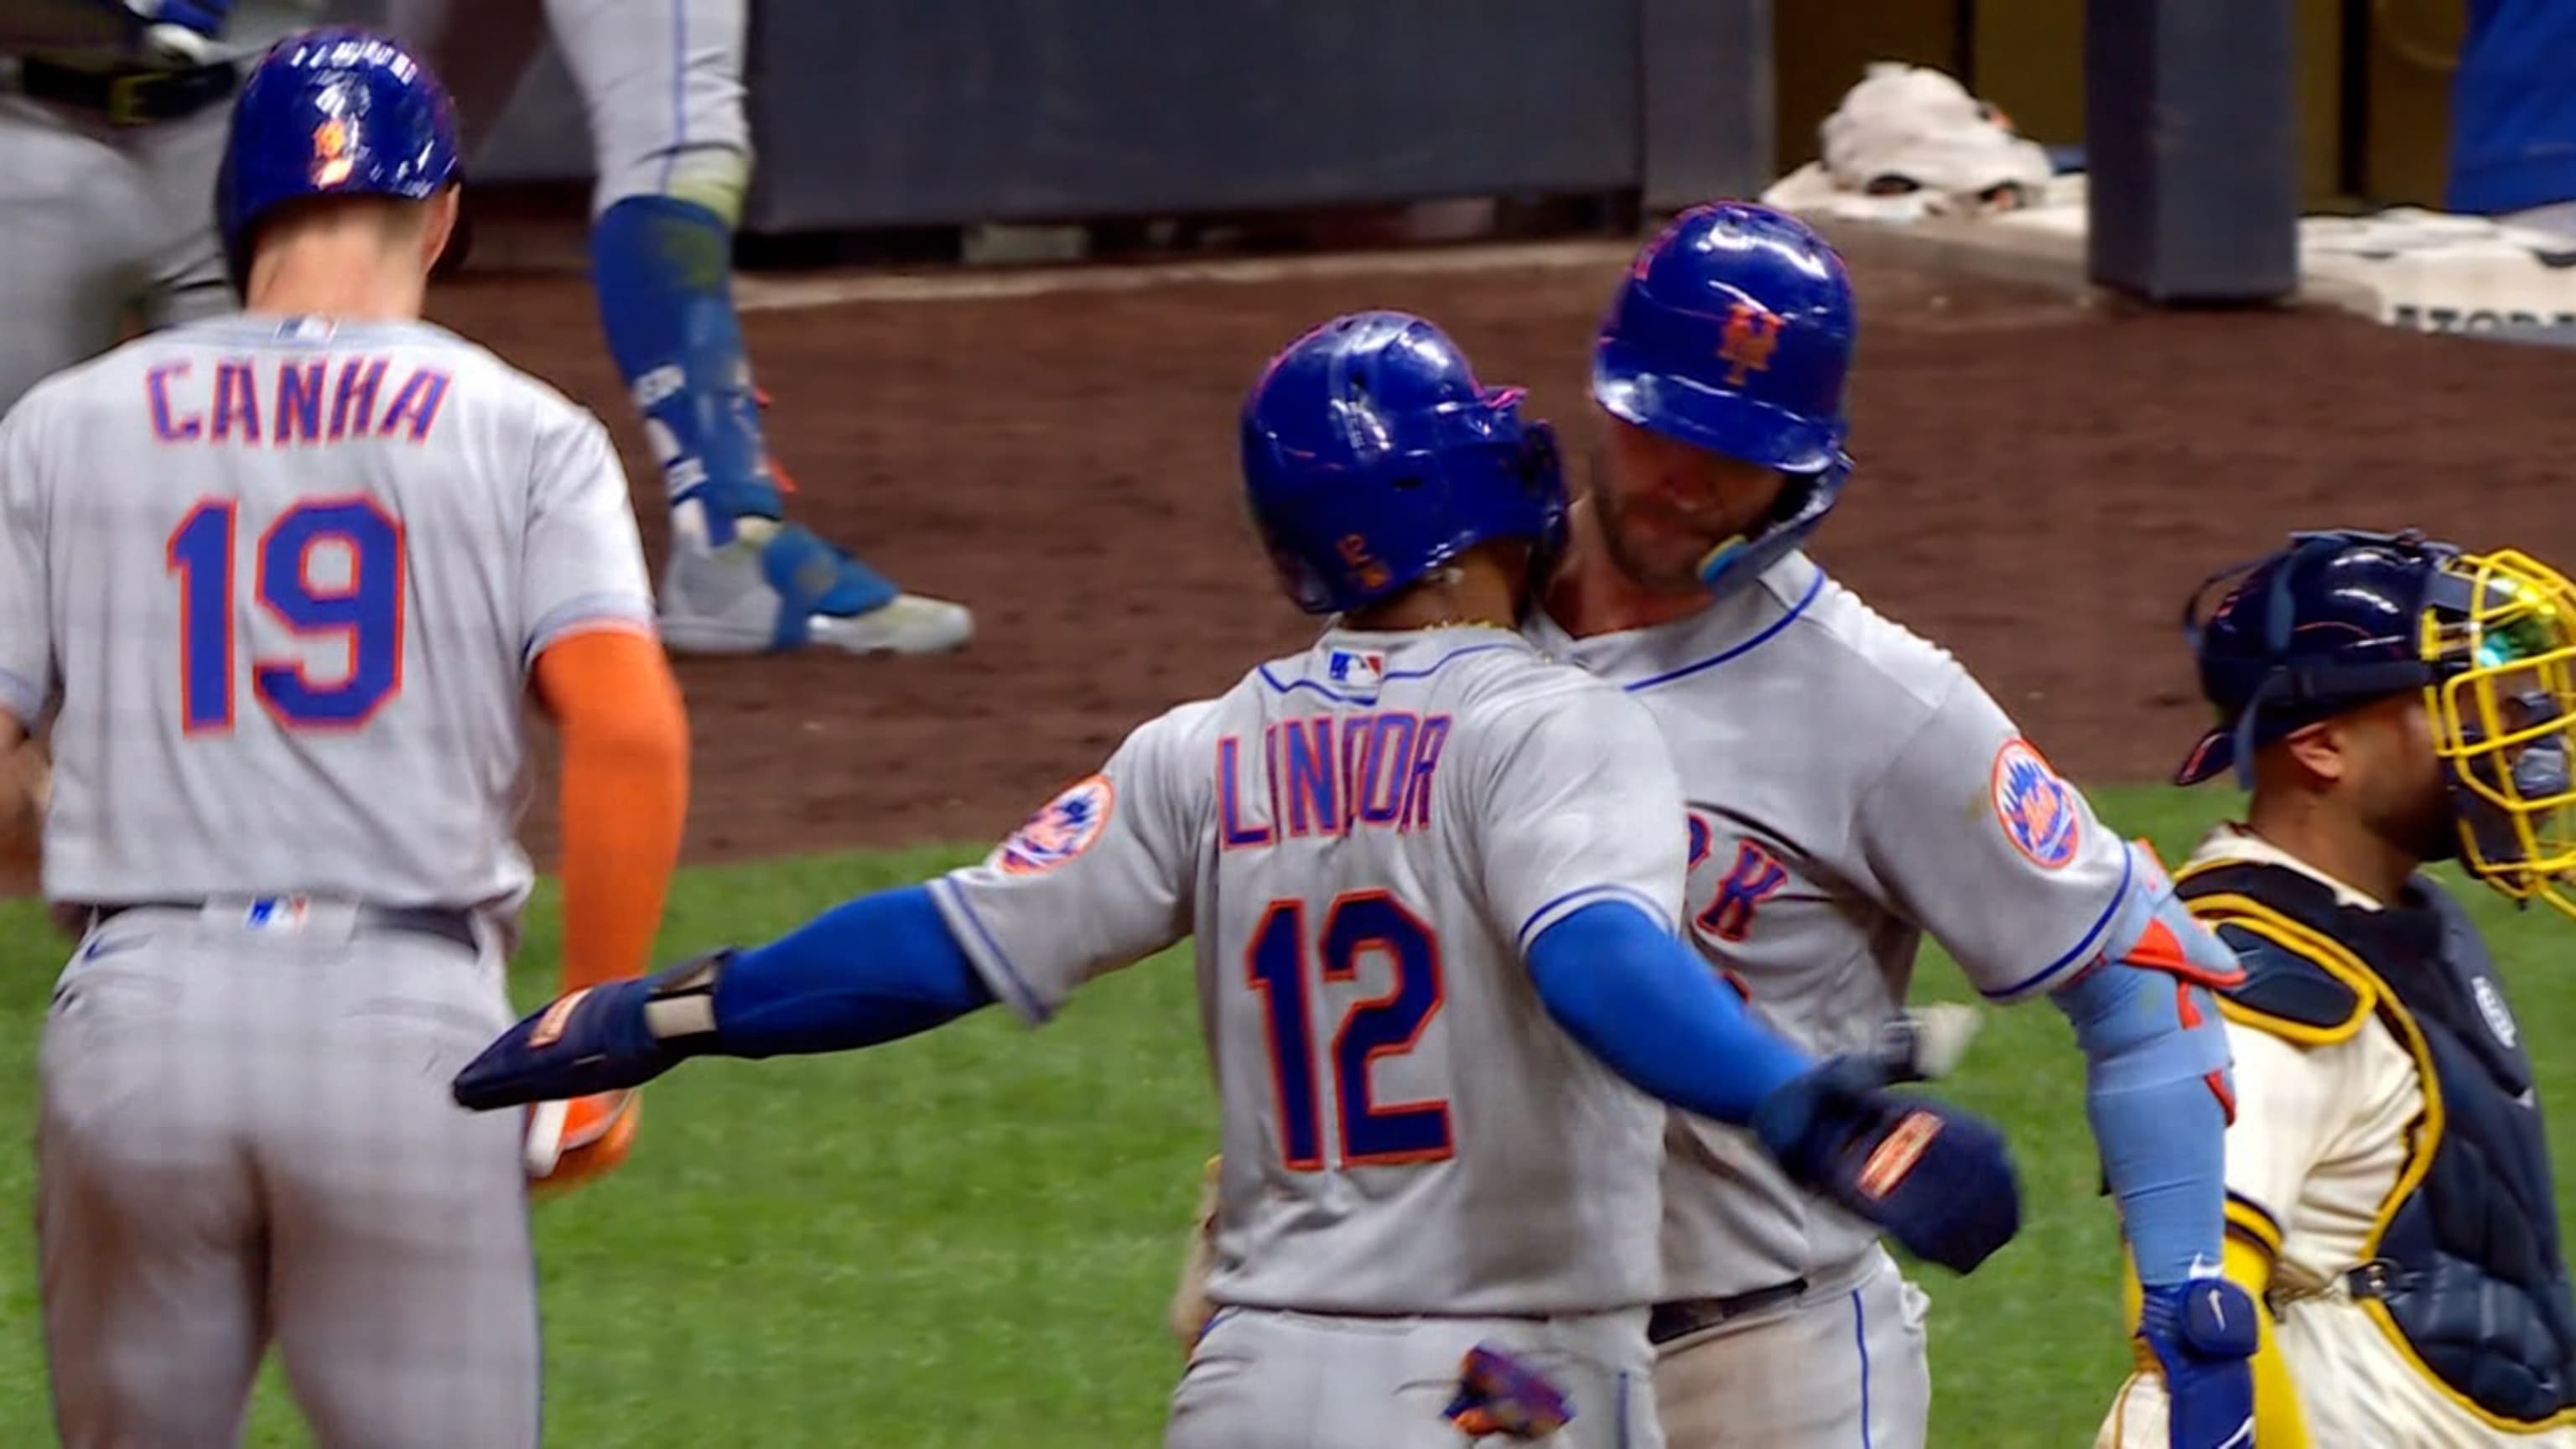 Francisco Lindor's three home runs lead Mets to wild, chippy win